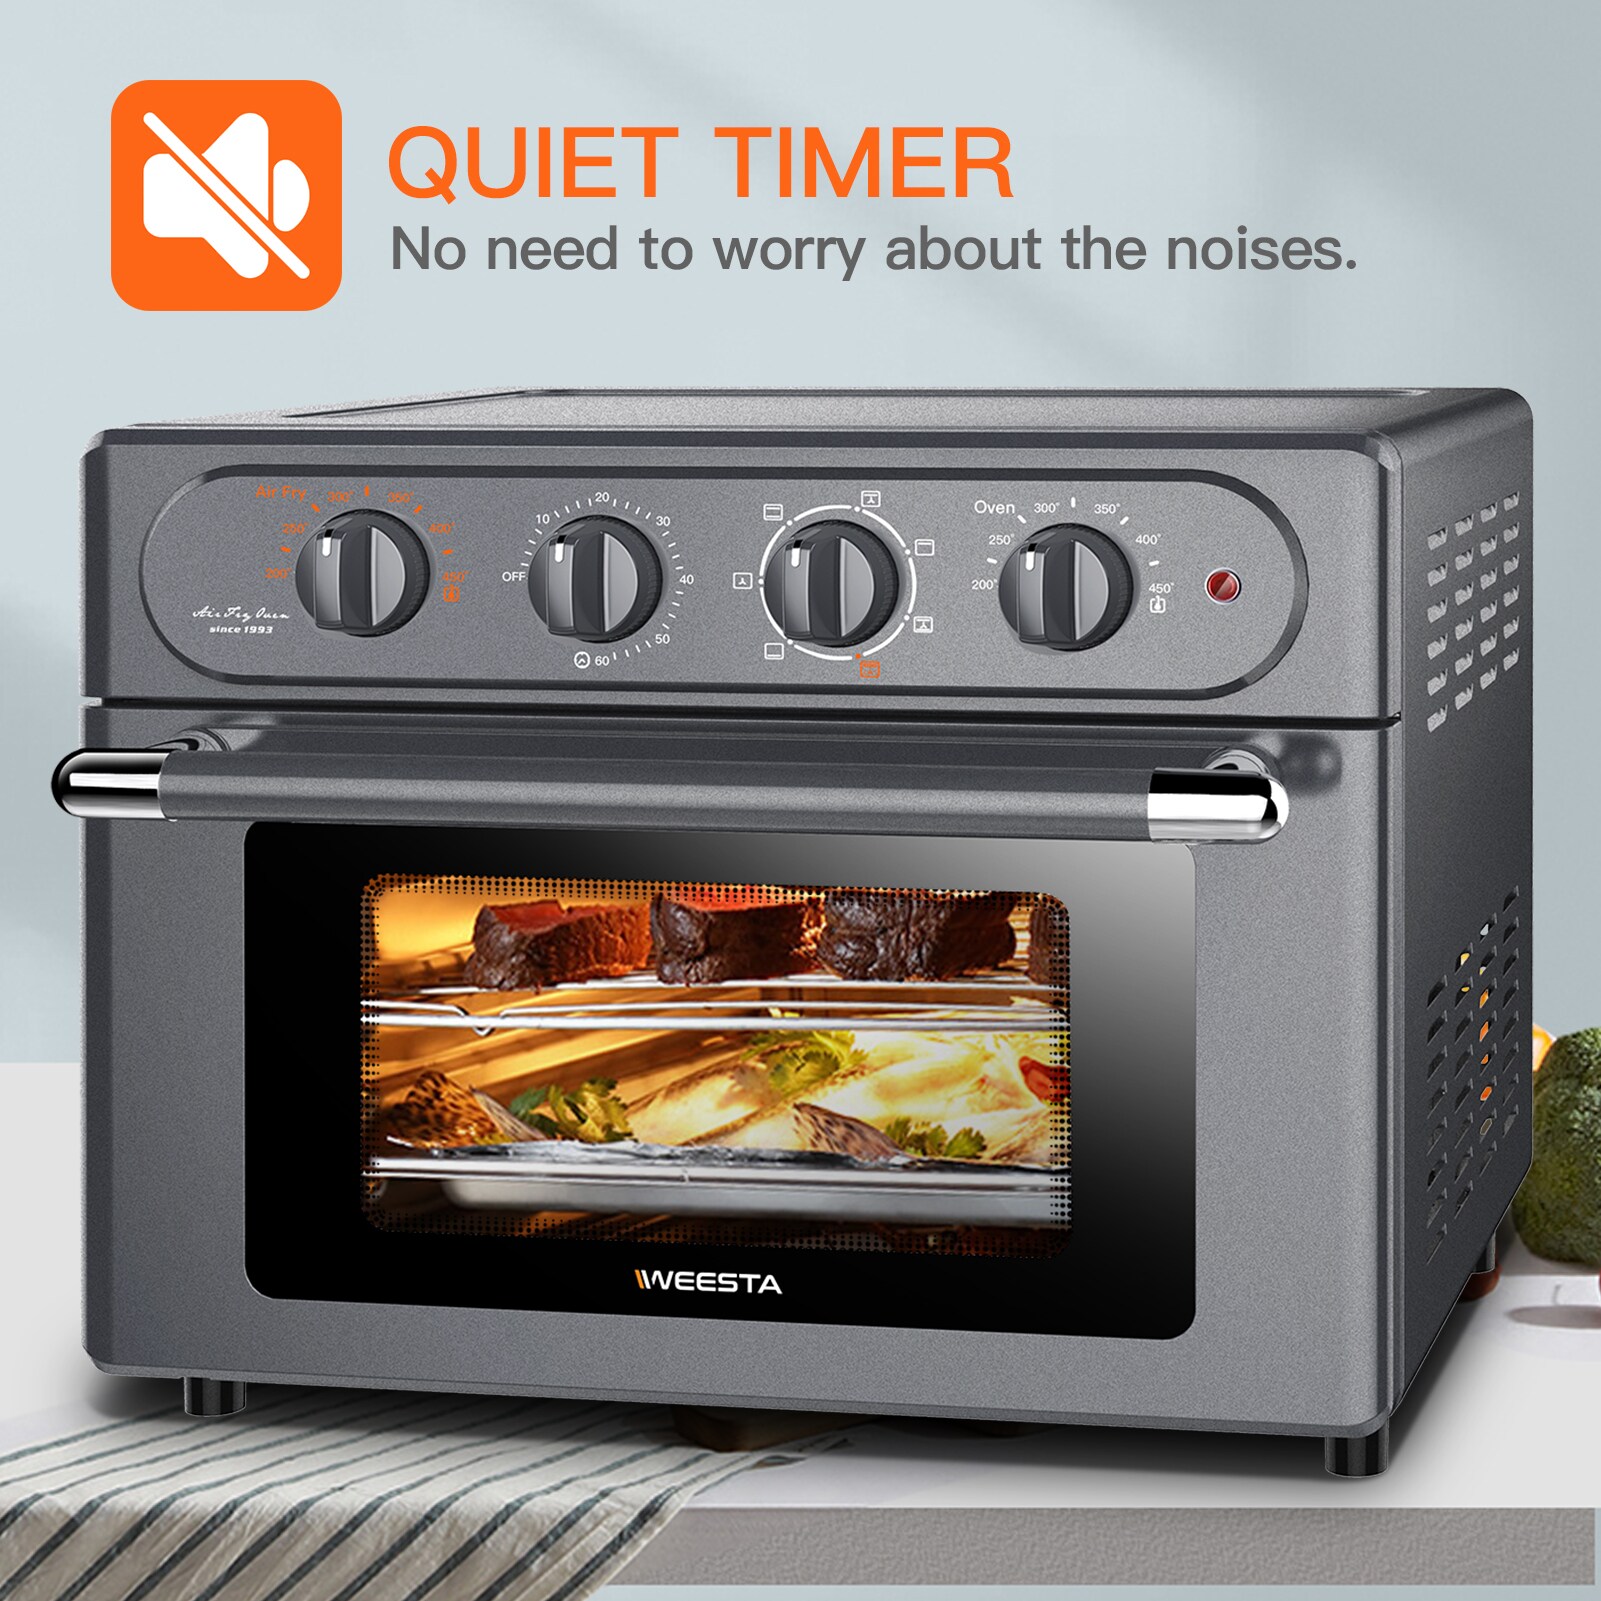 Mondawe 6-Slice Gray Convection Toaster Oven (1500-Watt) in the